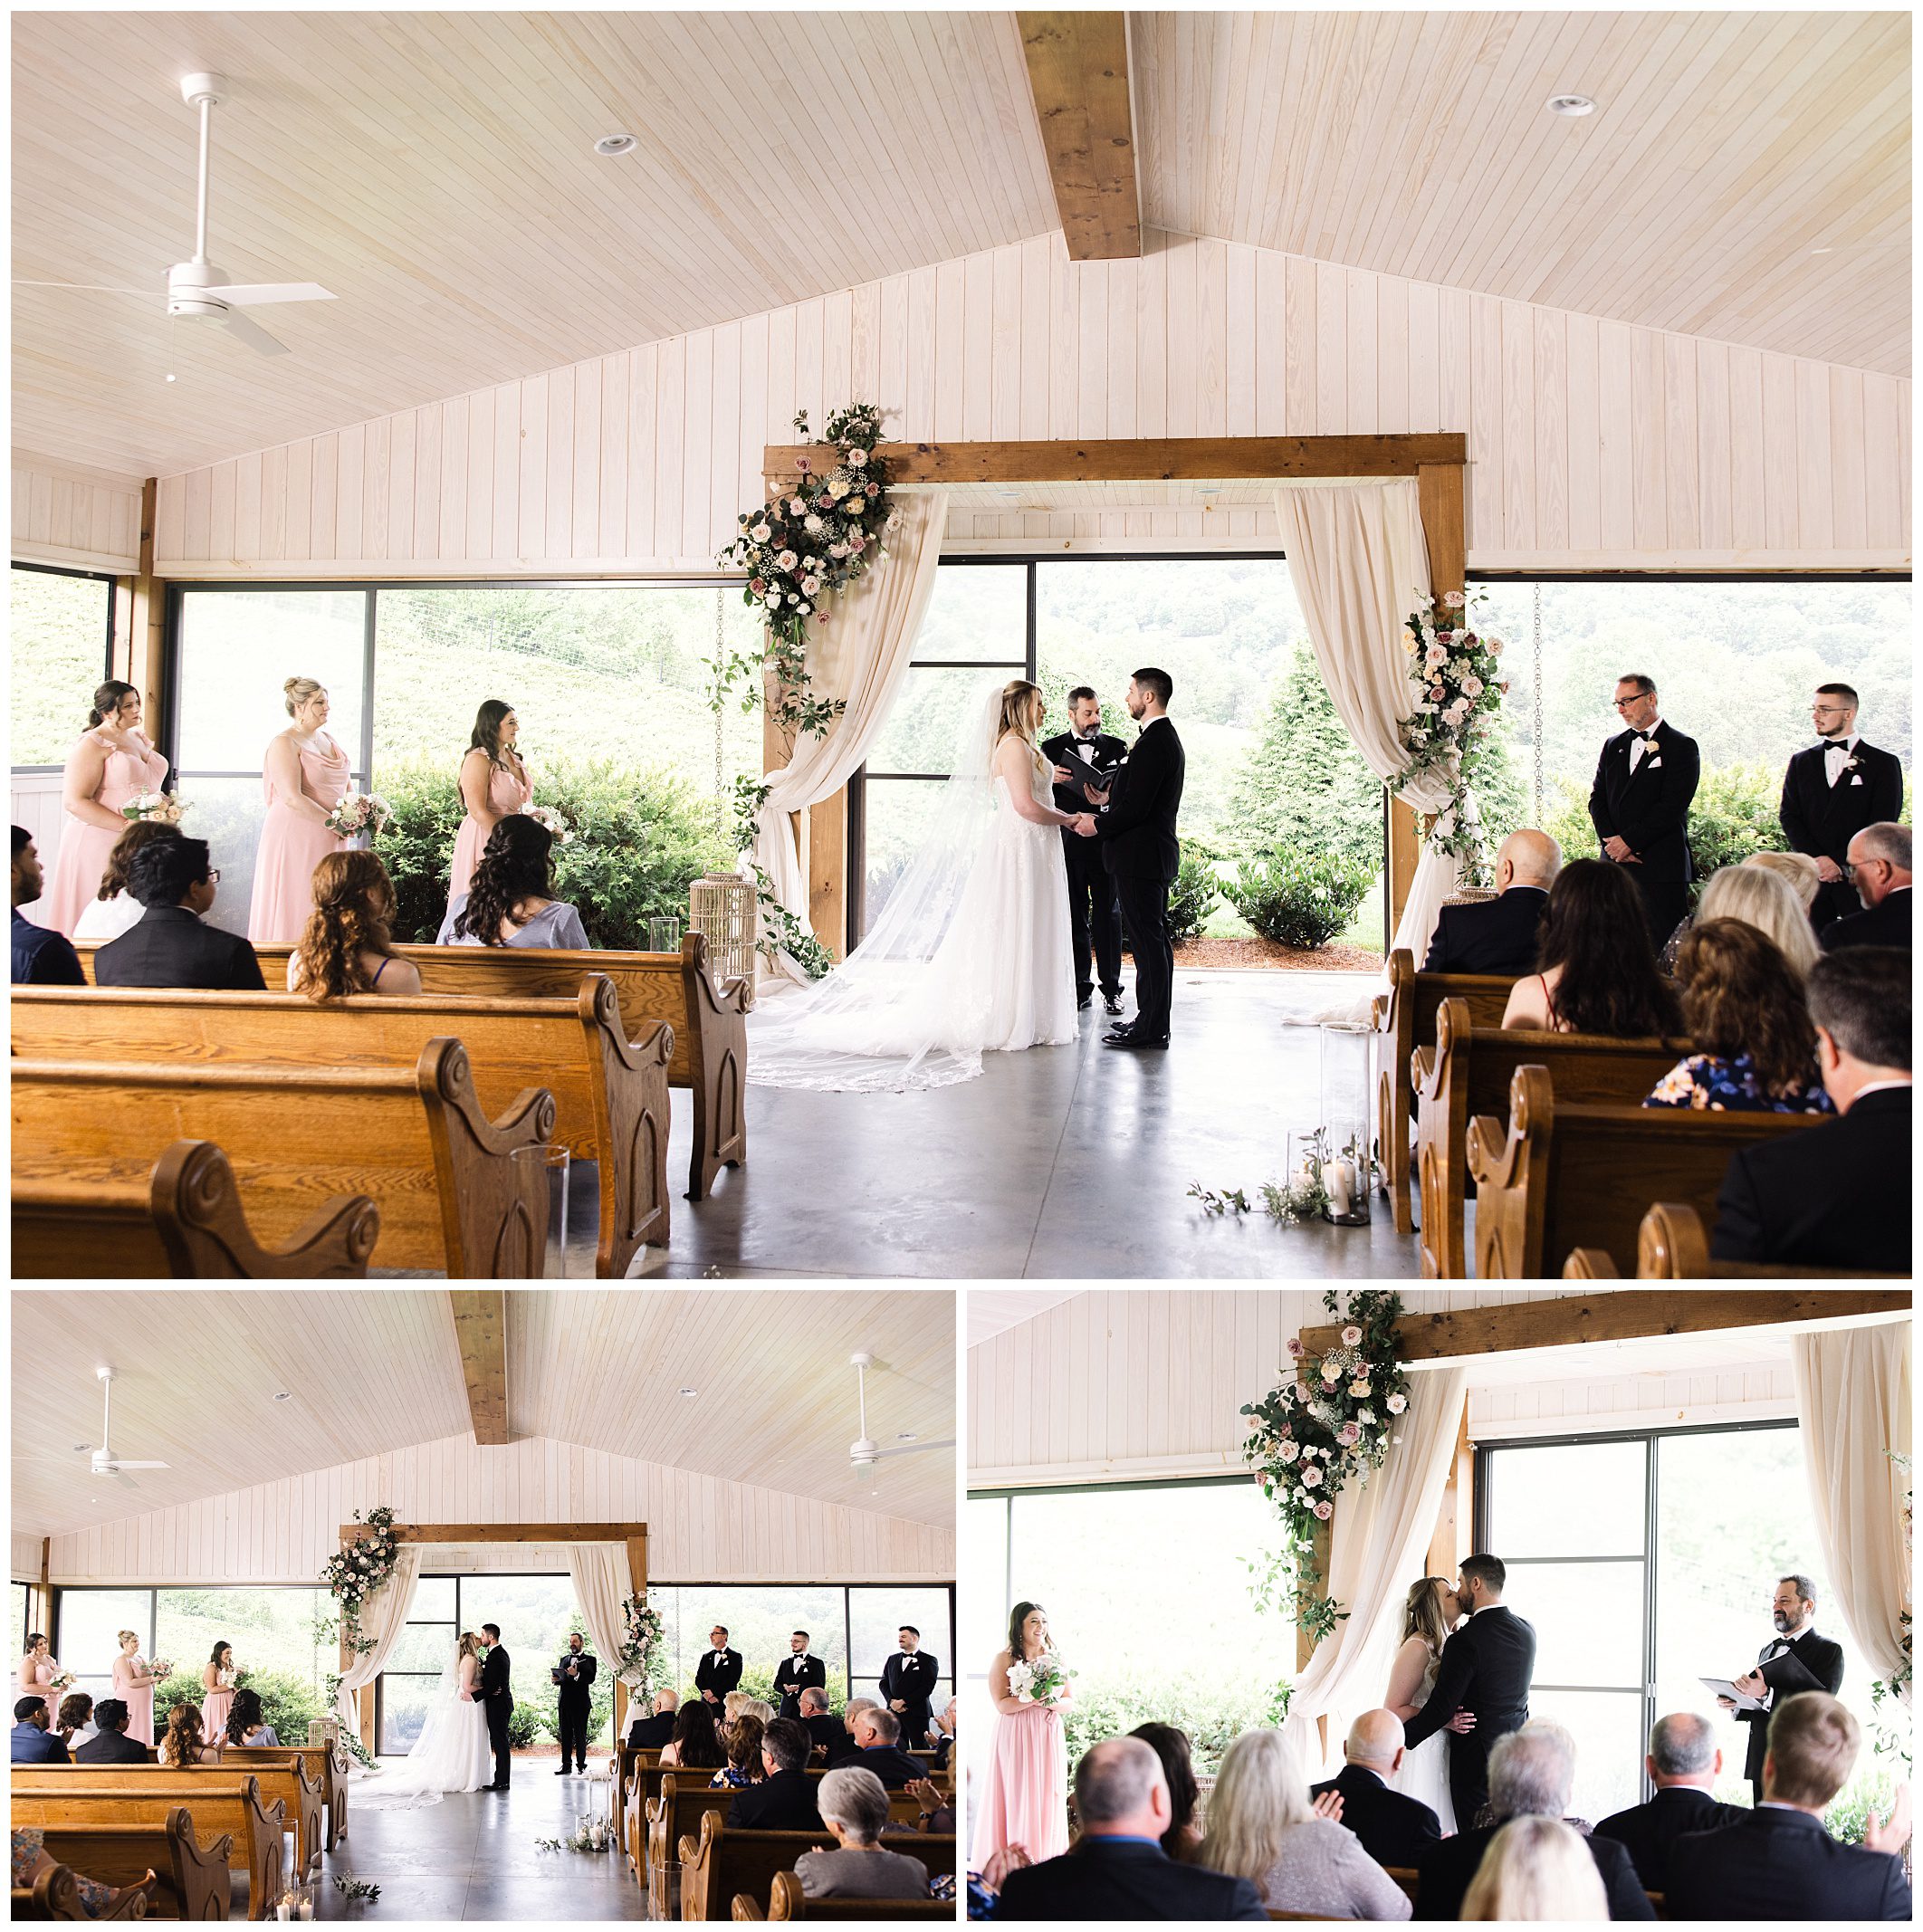 A collage depicting various scenes from a mountain wedding ceremony at Chestnut Ridge, showing the bride and groom at the altar, surrounded by guests and attendants.